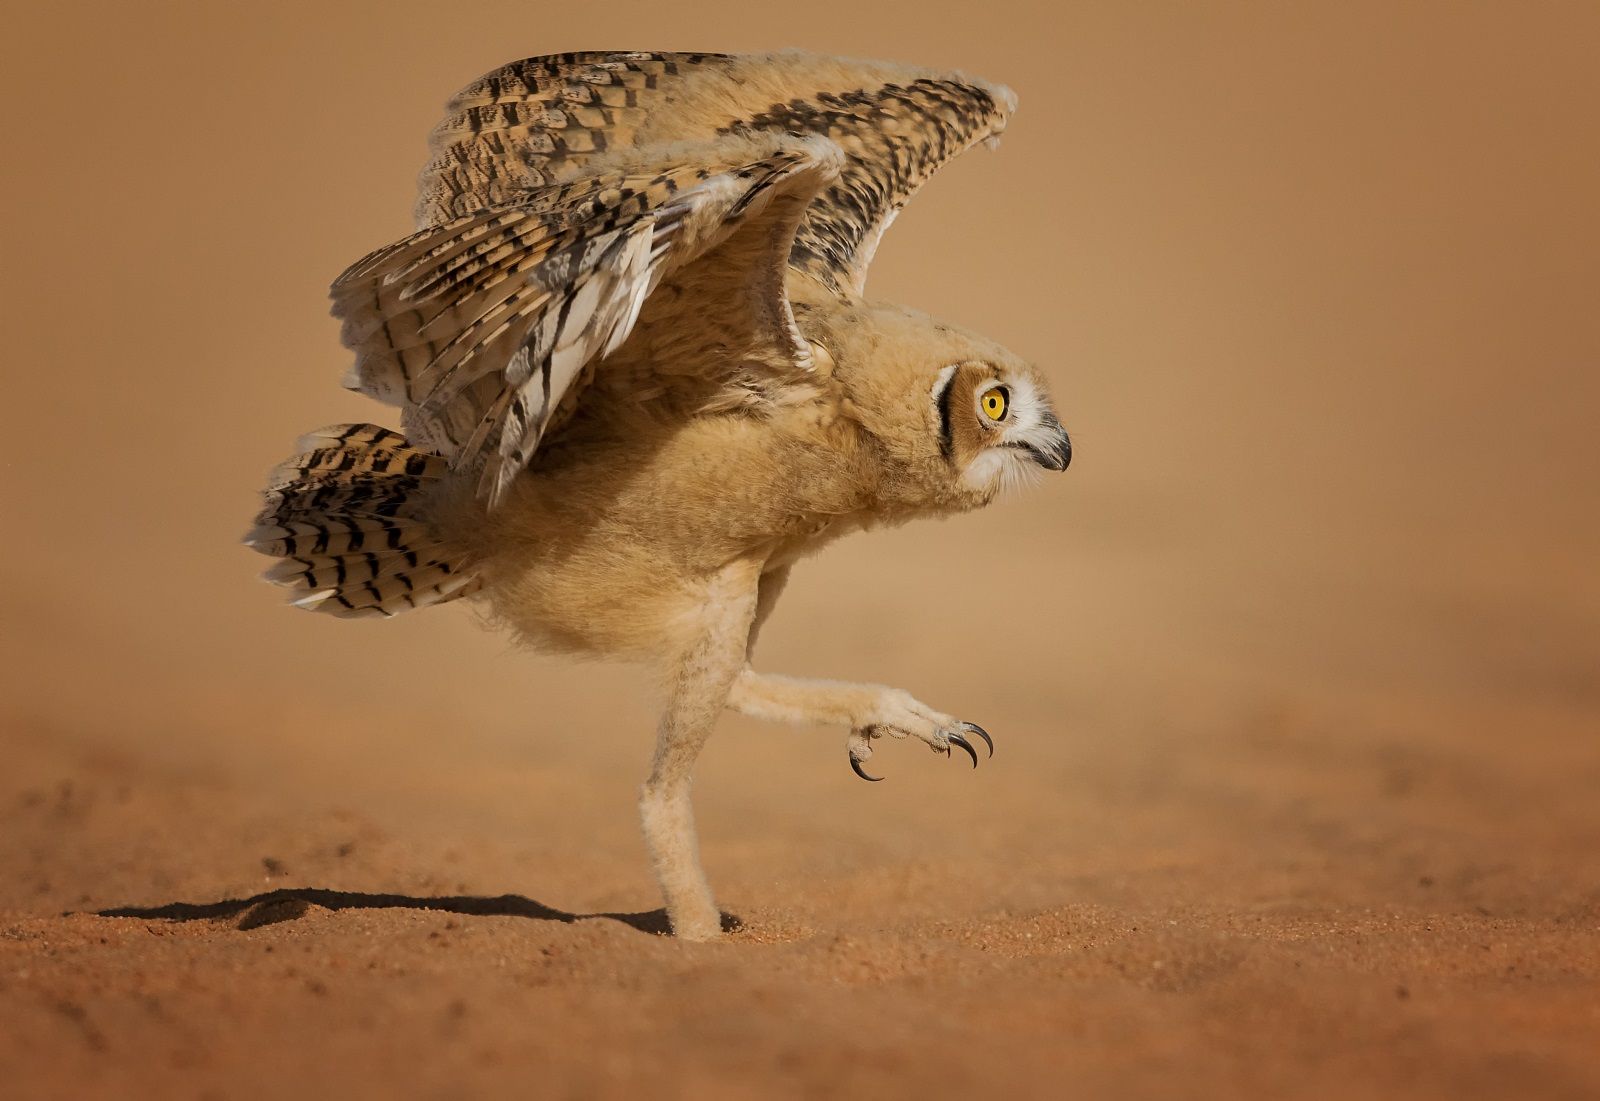 Enjoy a good giggle with the Comedy Wildlife Photography awards photo 29